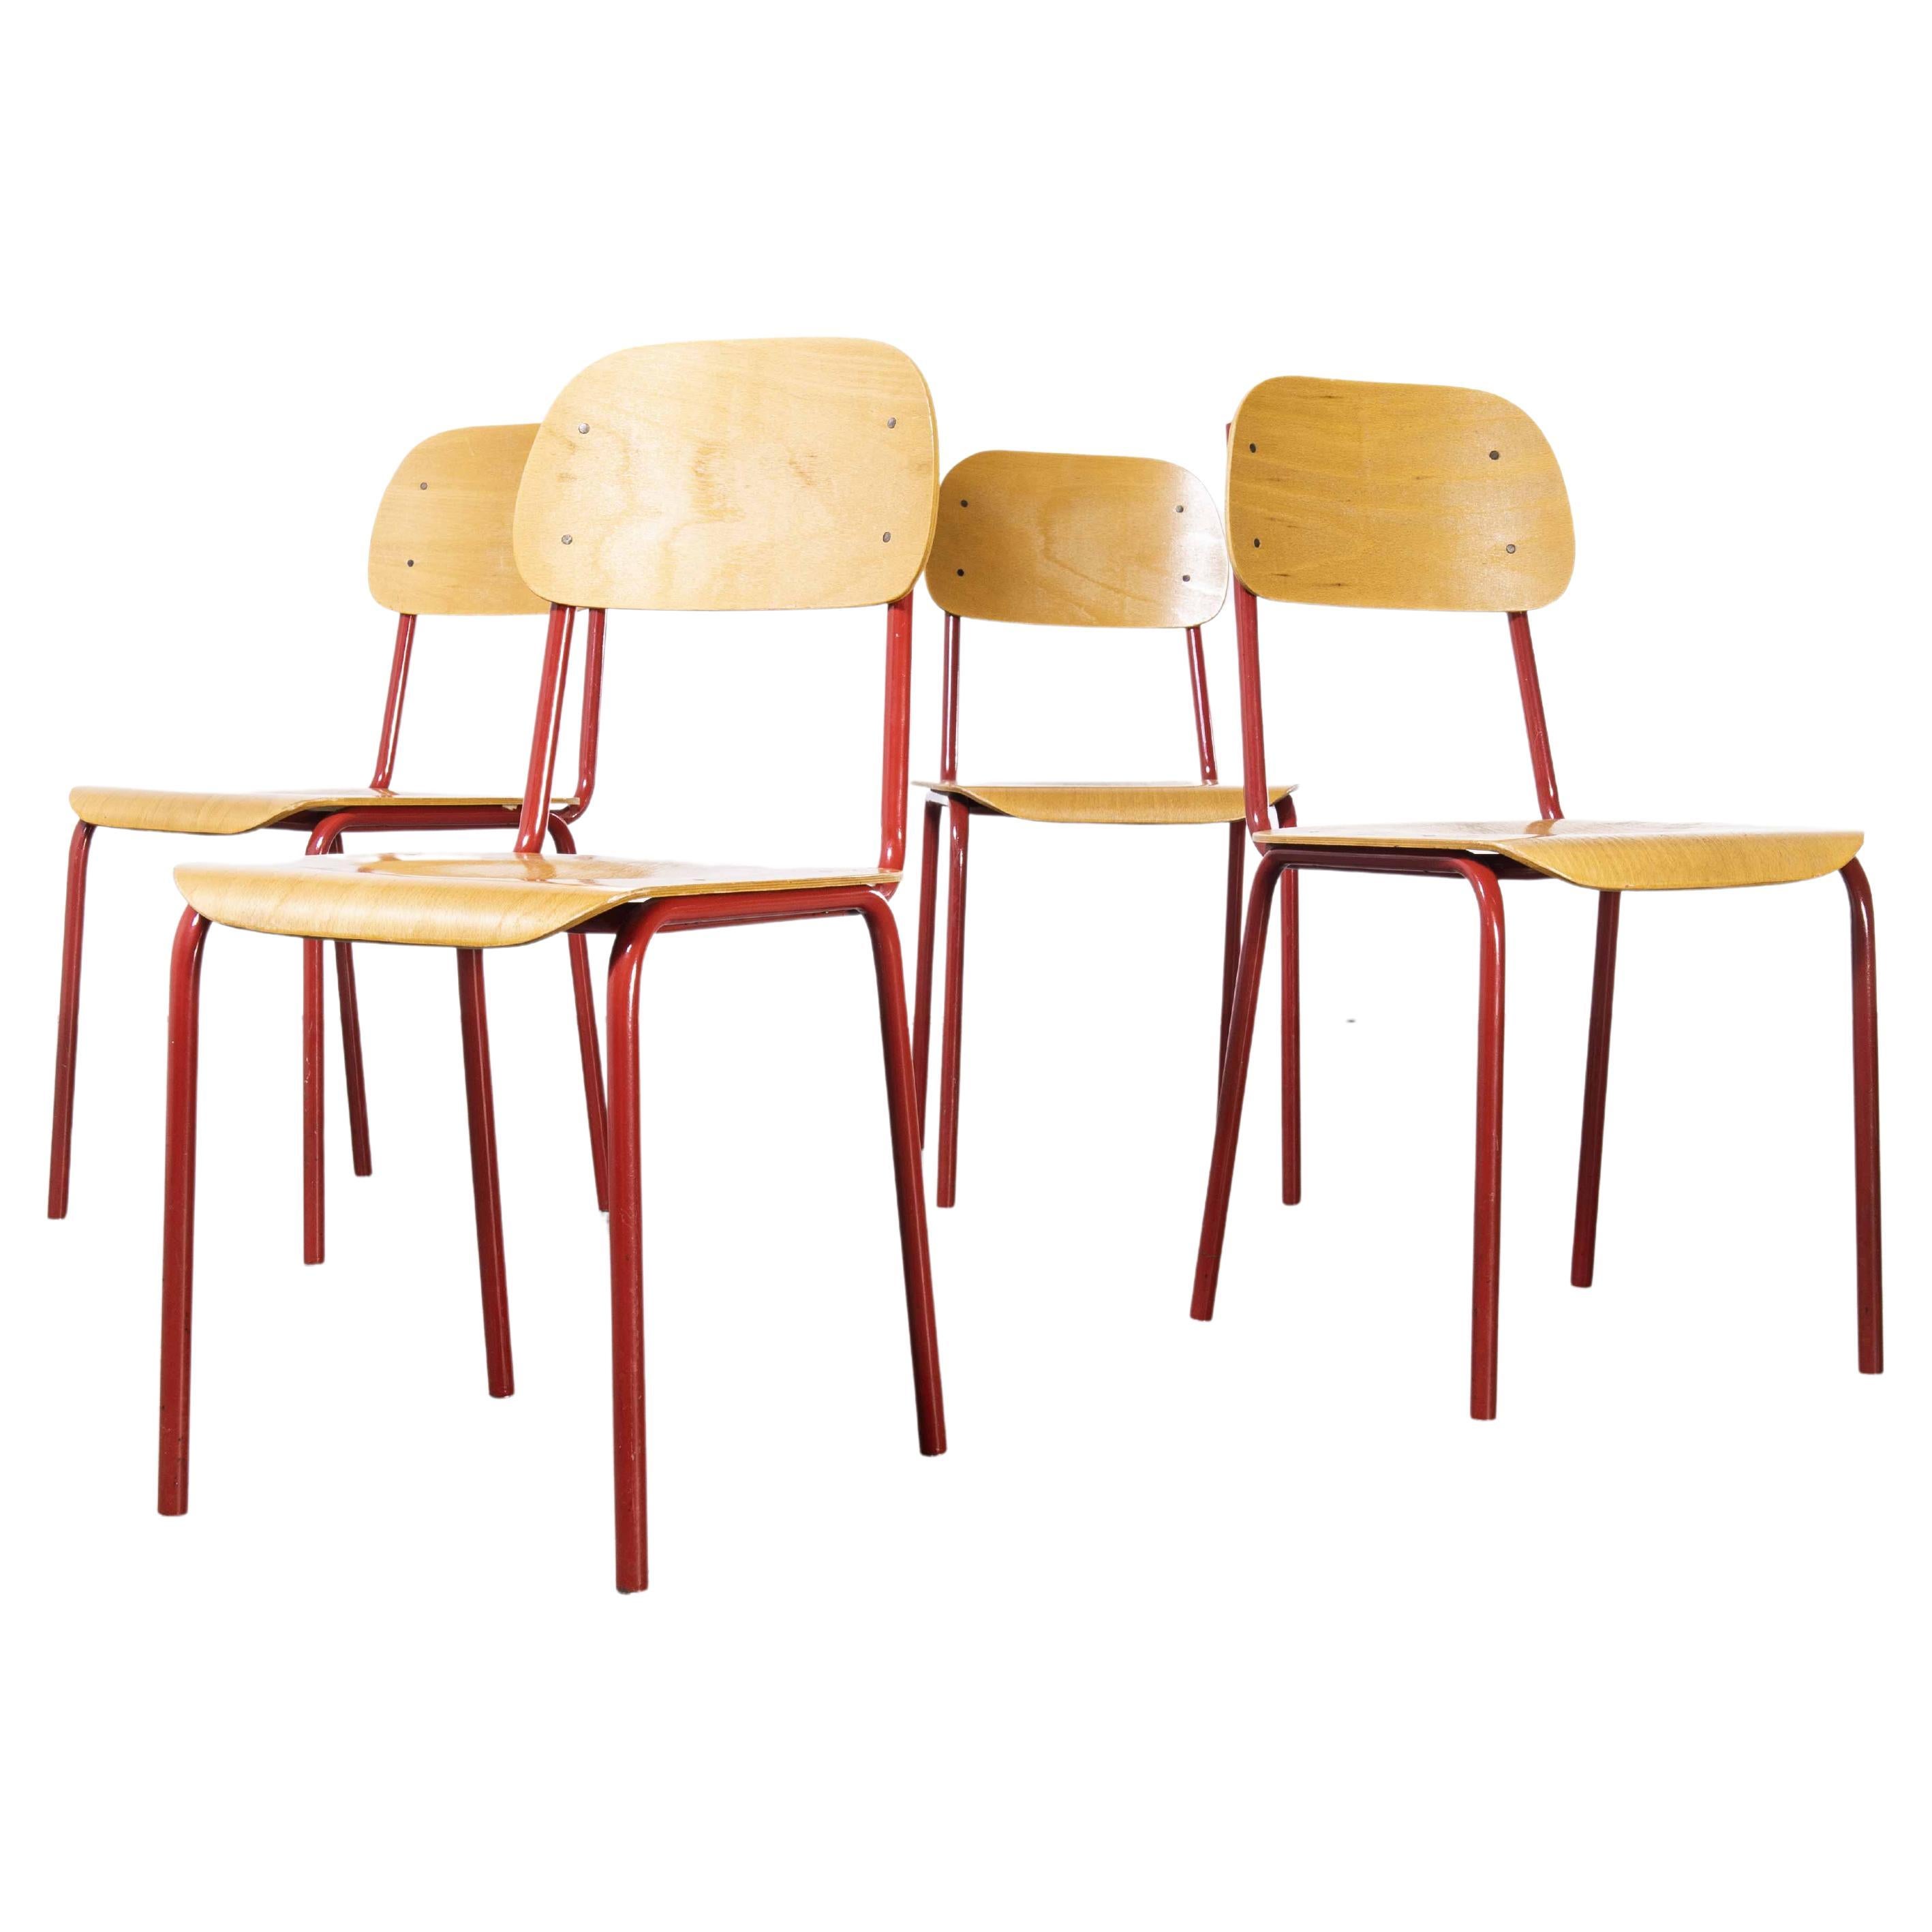 1970's Czech Industrial Stacking Chairs, Red, Set of Four For Sale